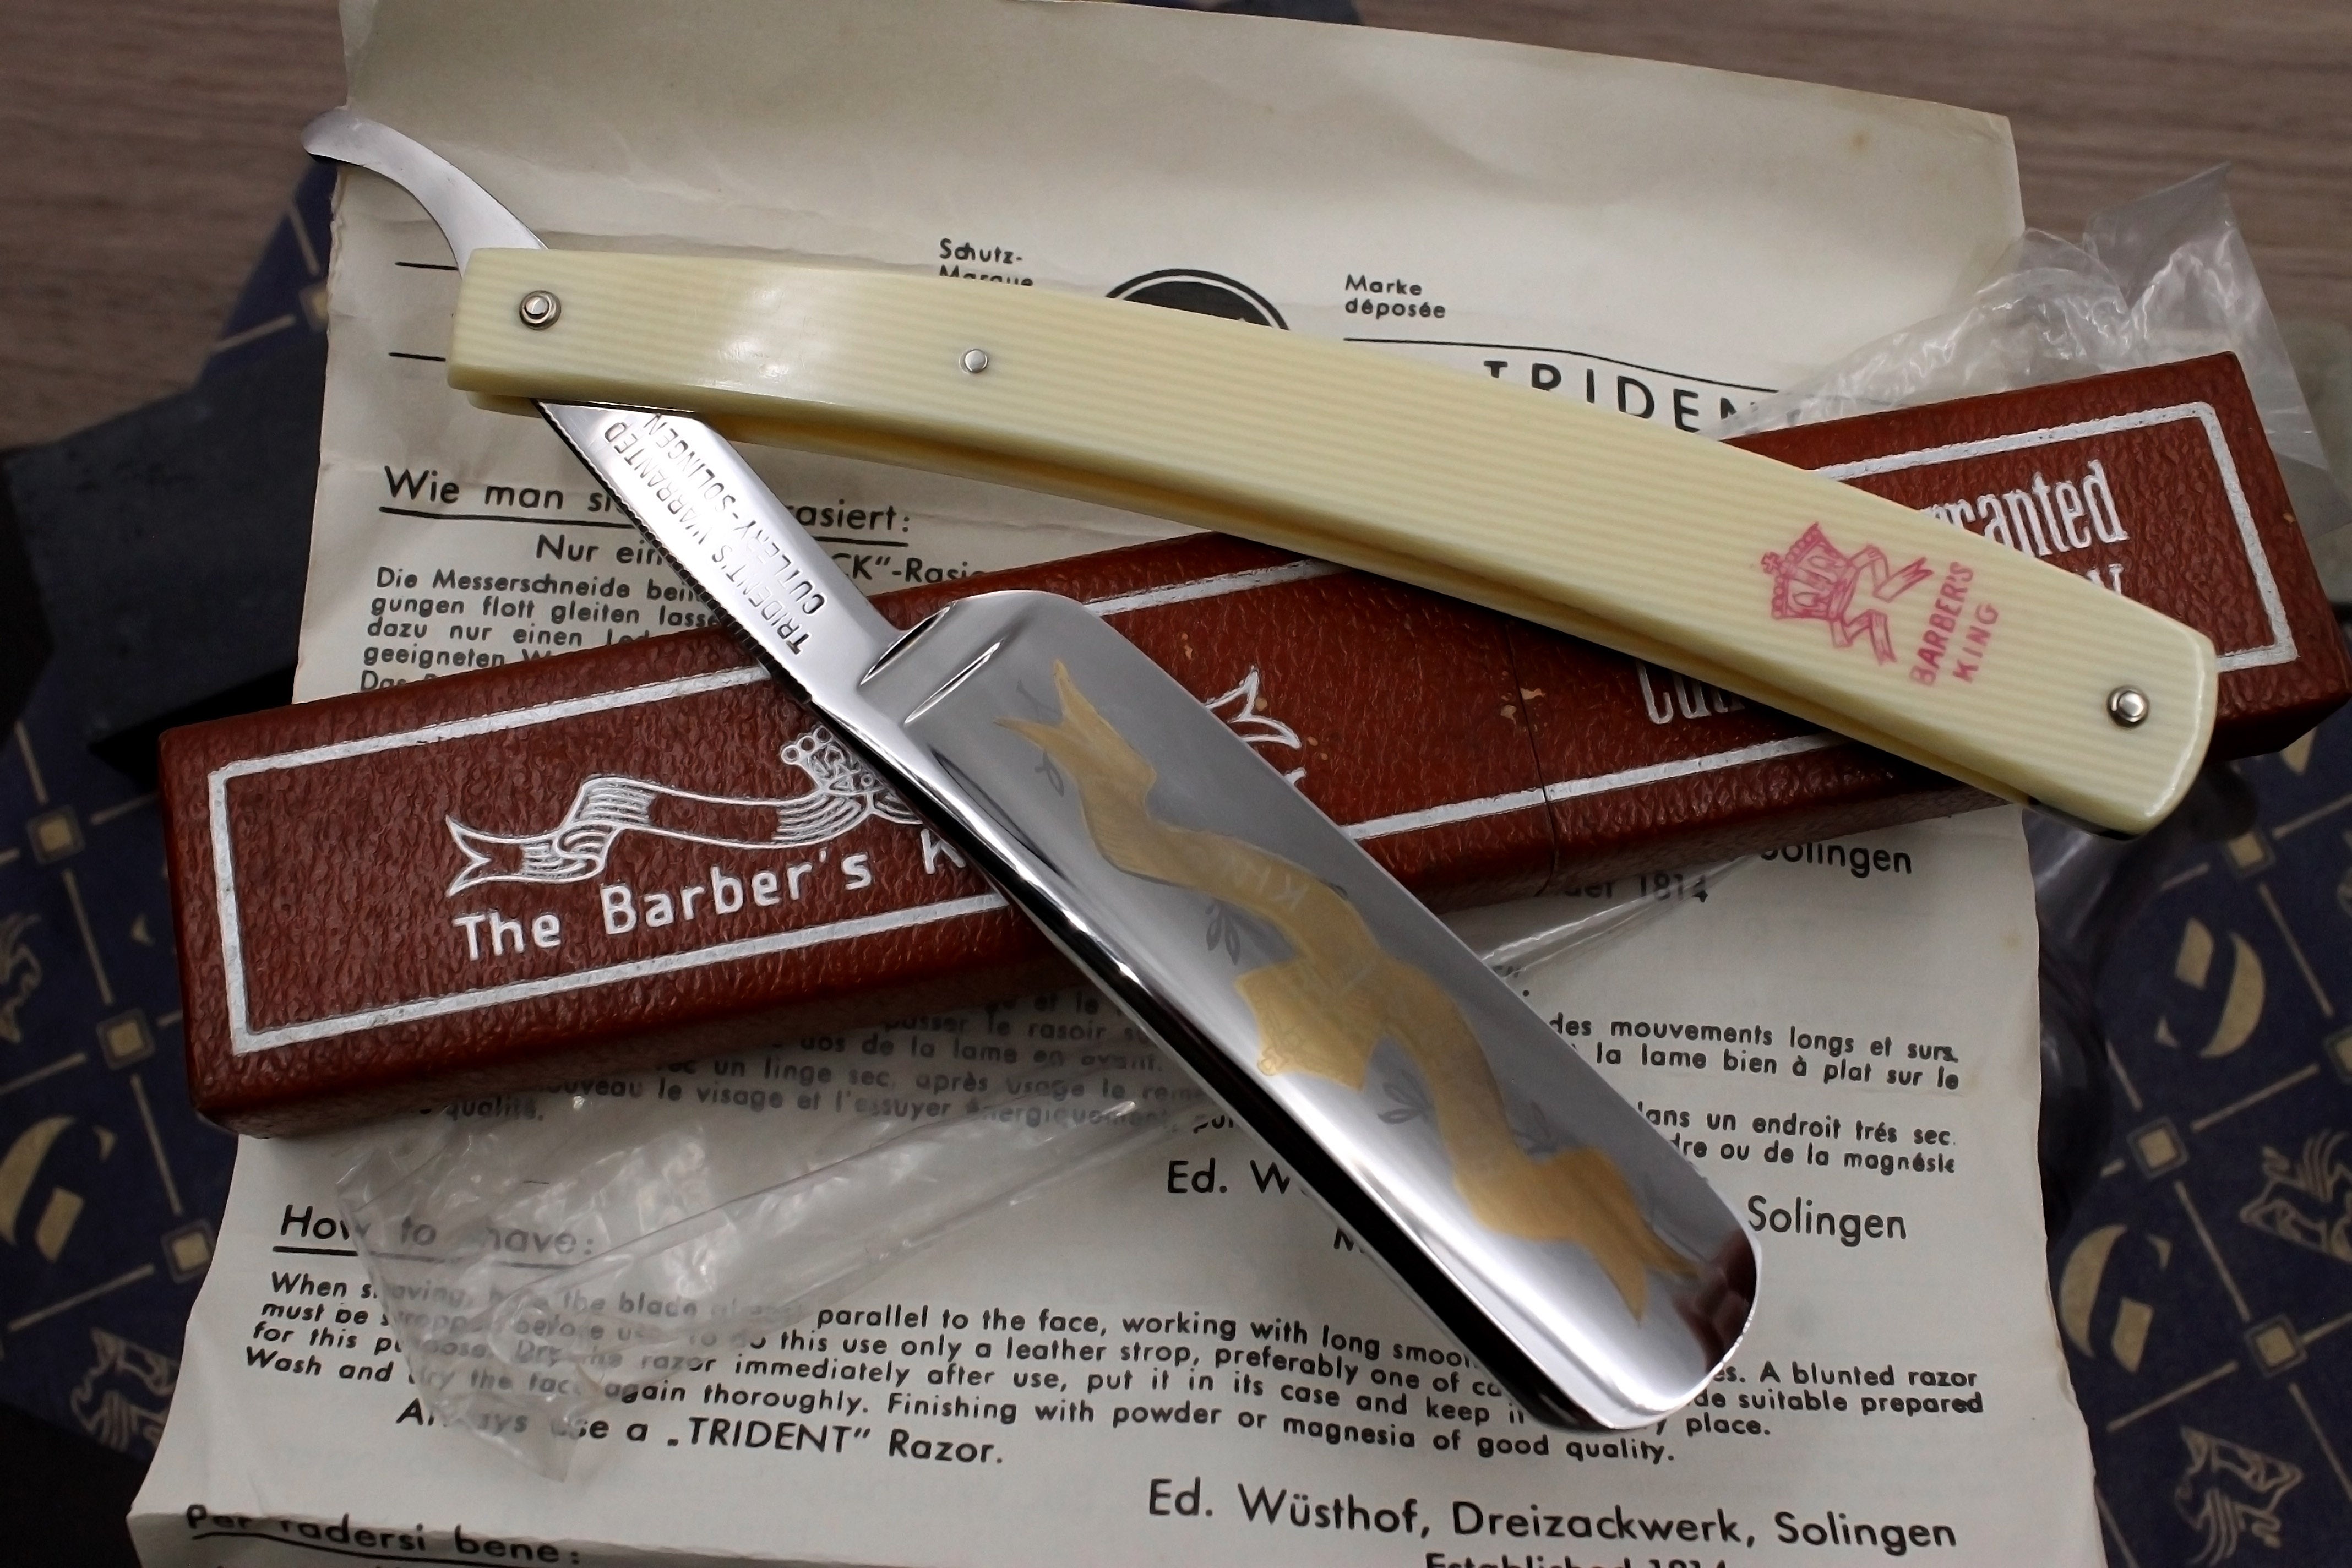 Ed Wusthoff Barber's King - Like New NOS? 13/16 Full Hollow Blade - Vintage Solingen Straight Razor - Shave Ready